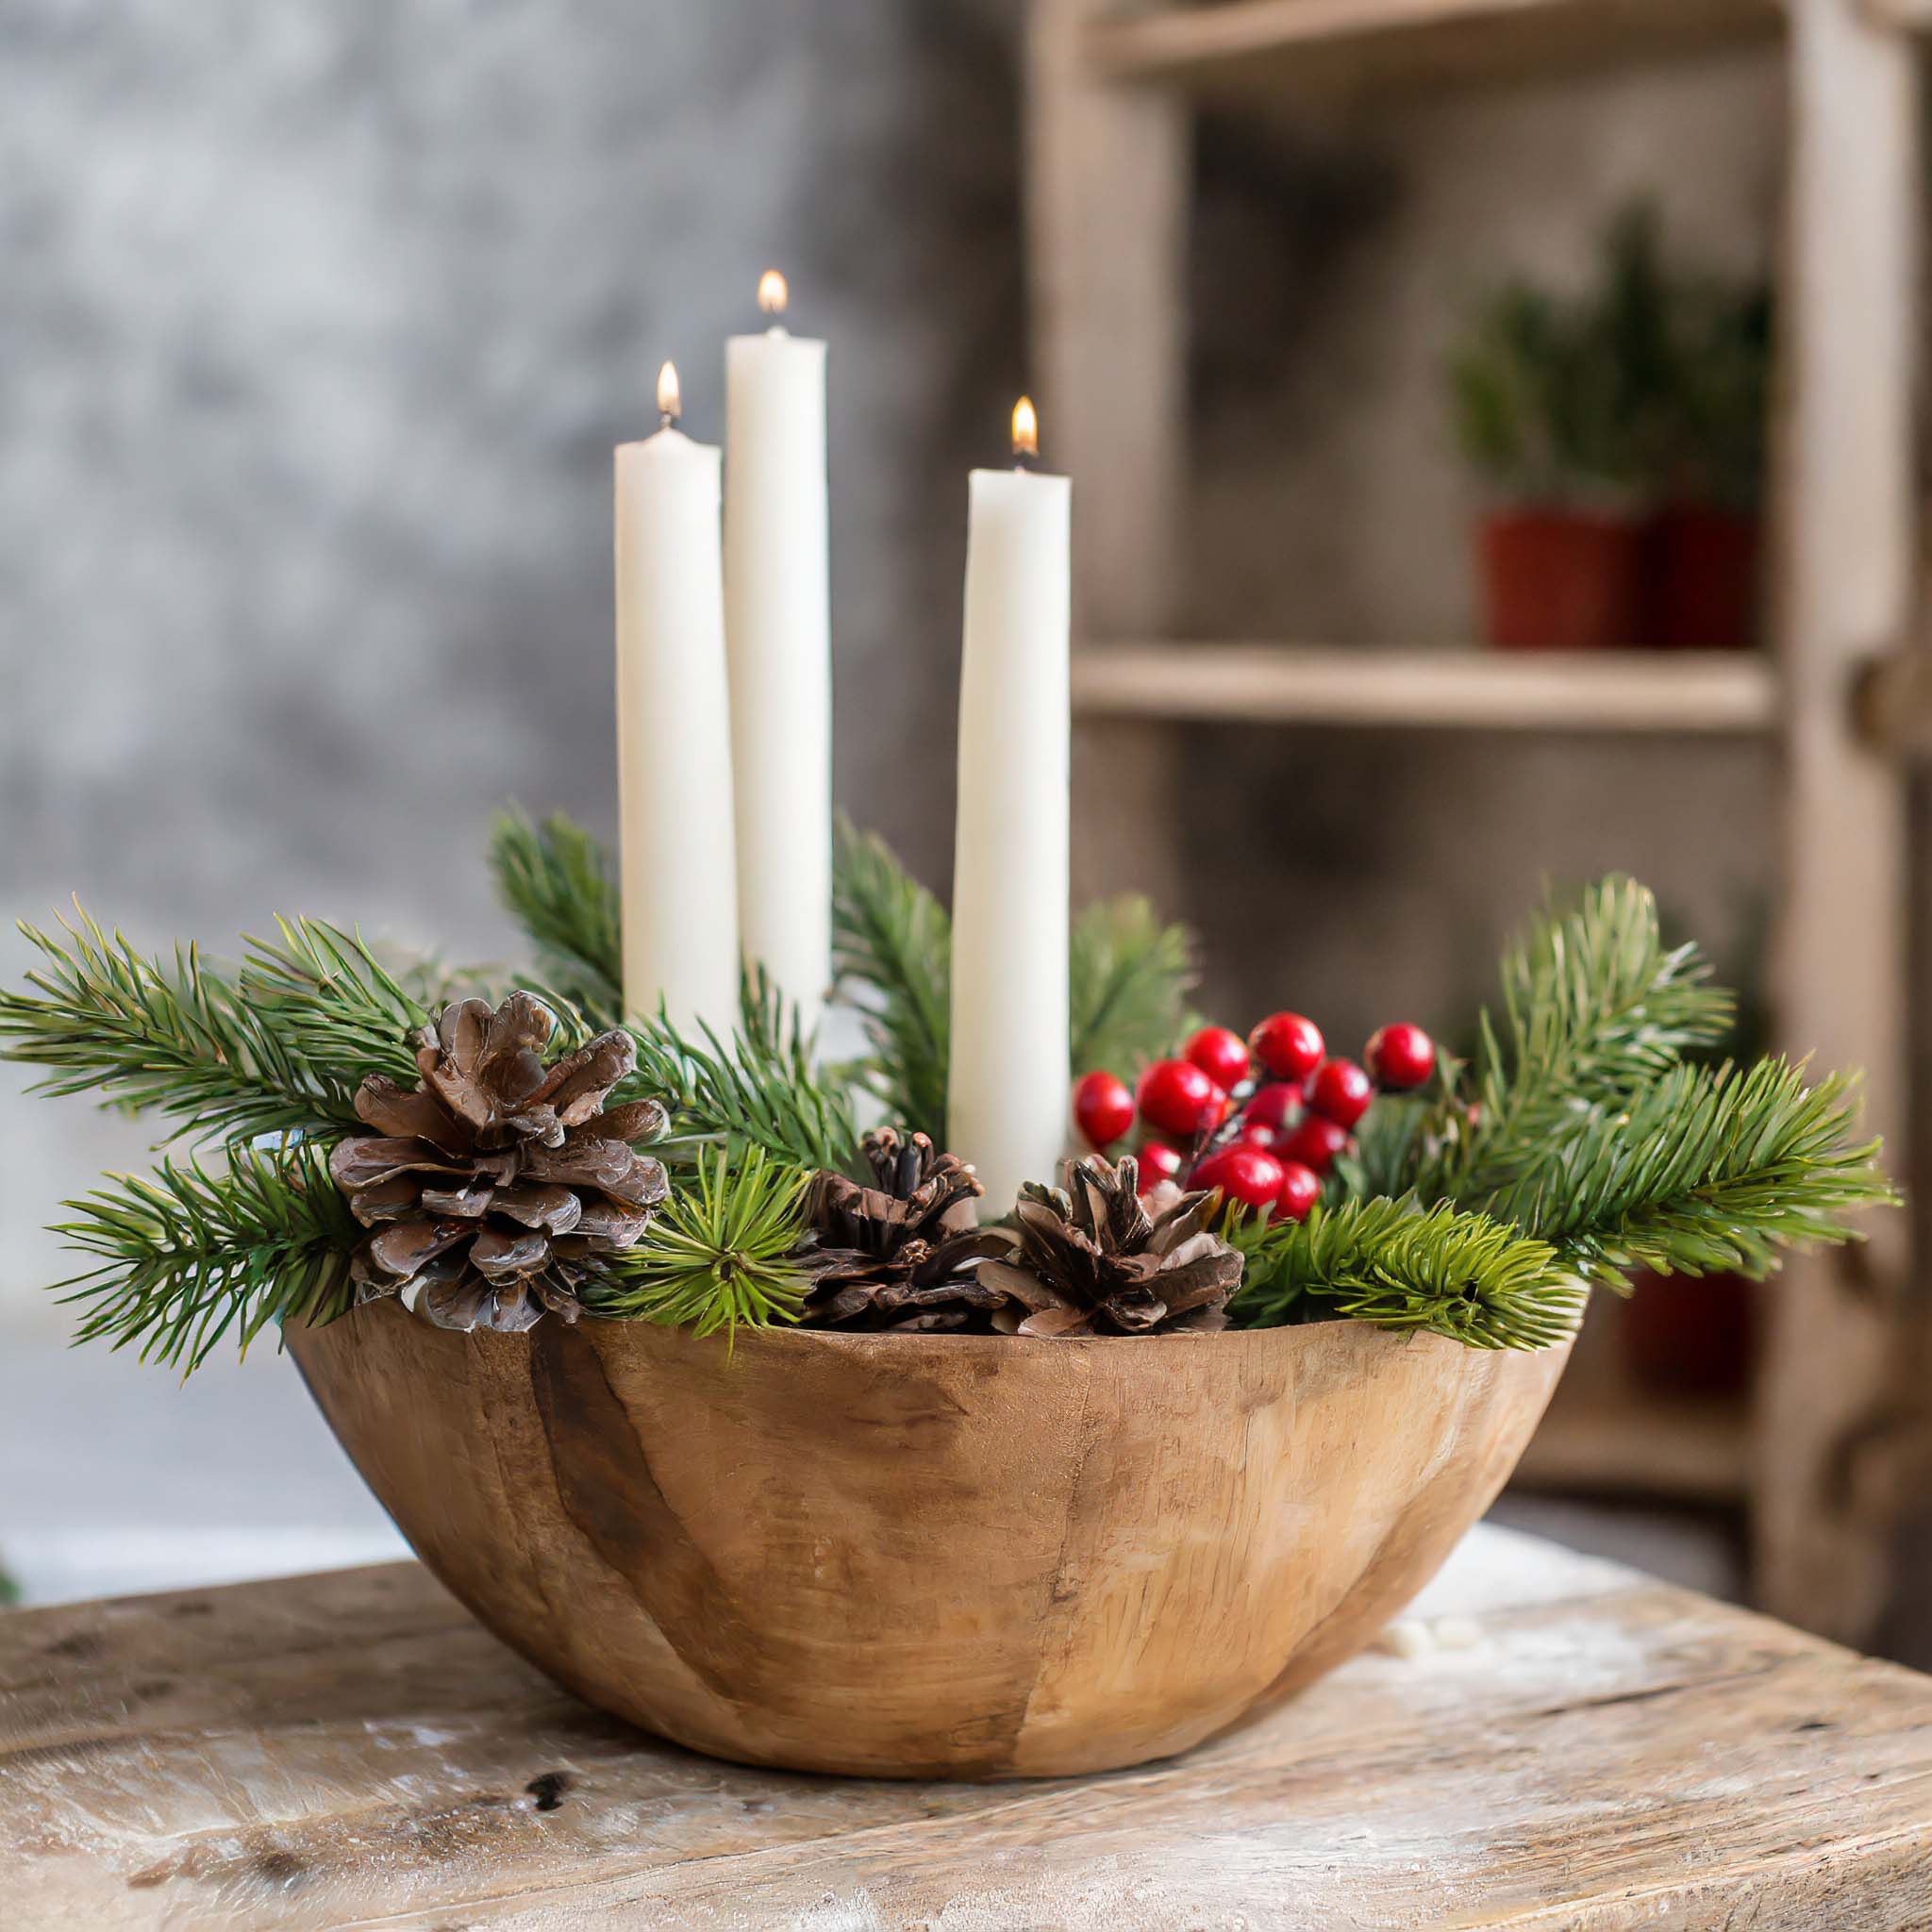 Round wooden dough bowl filled with greenery, pine cones, berries, and tapered candles.